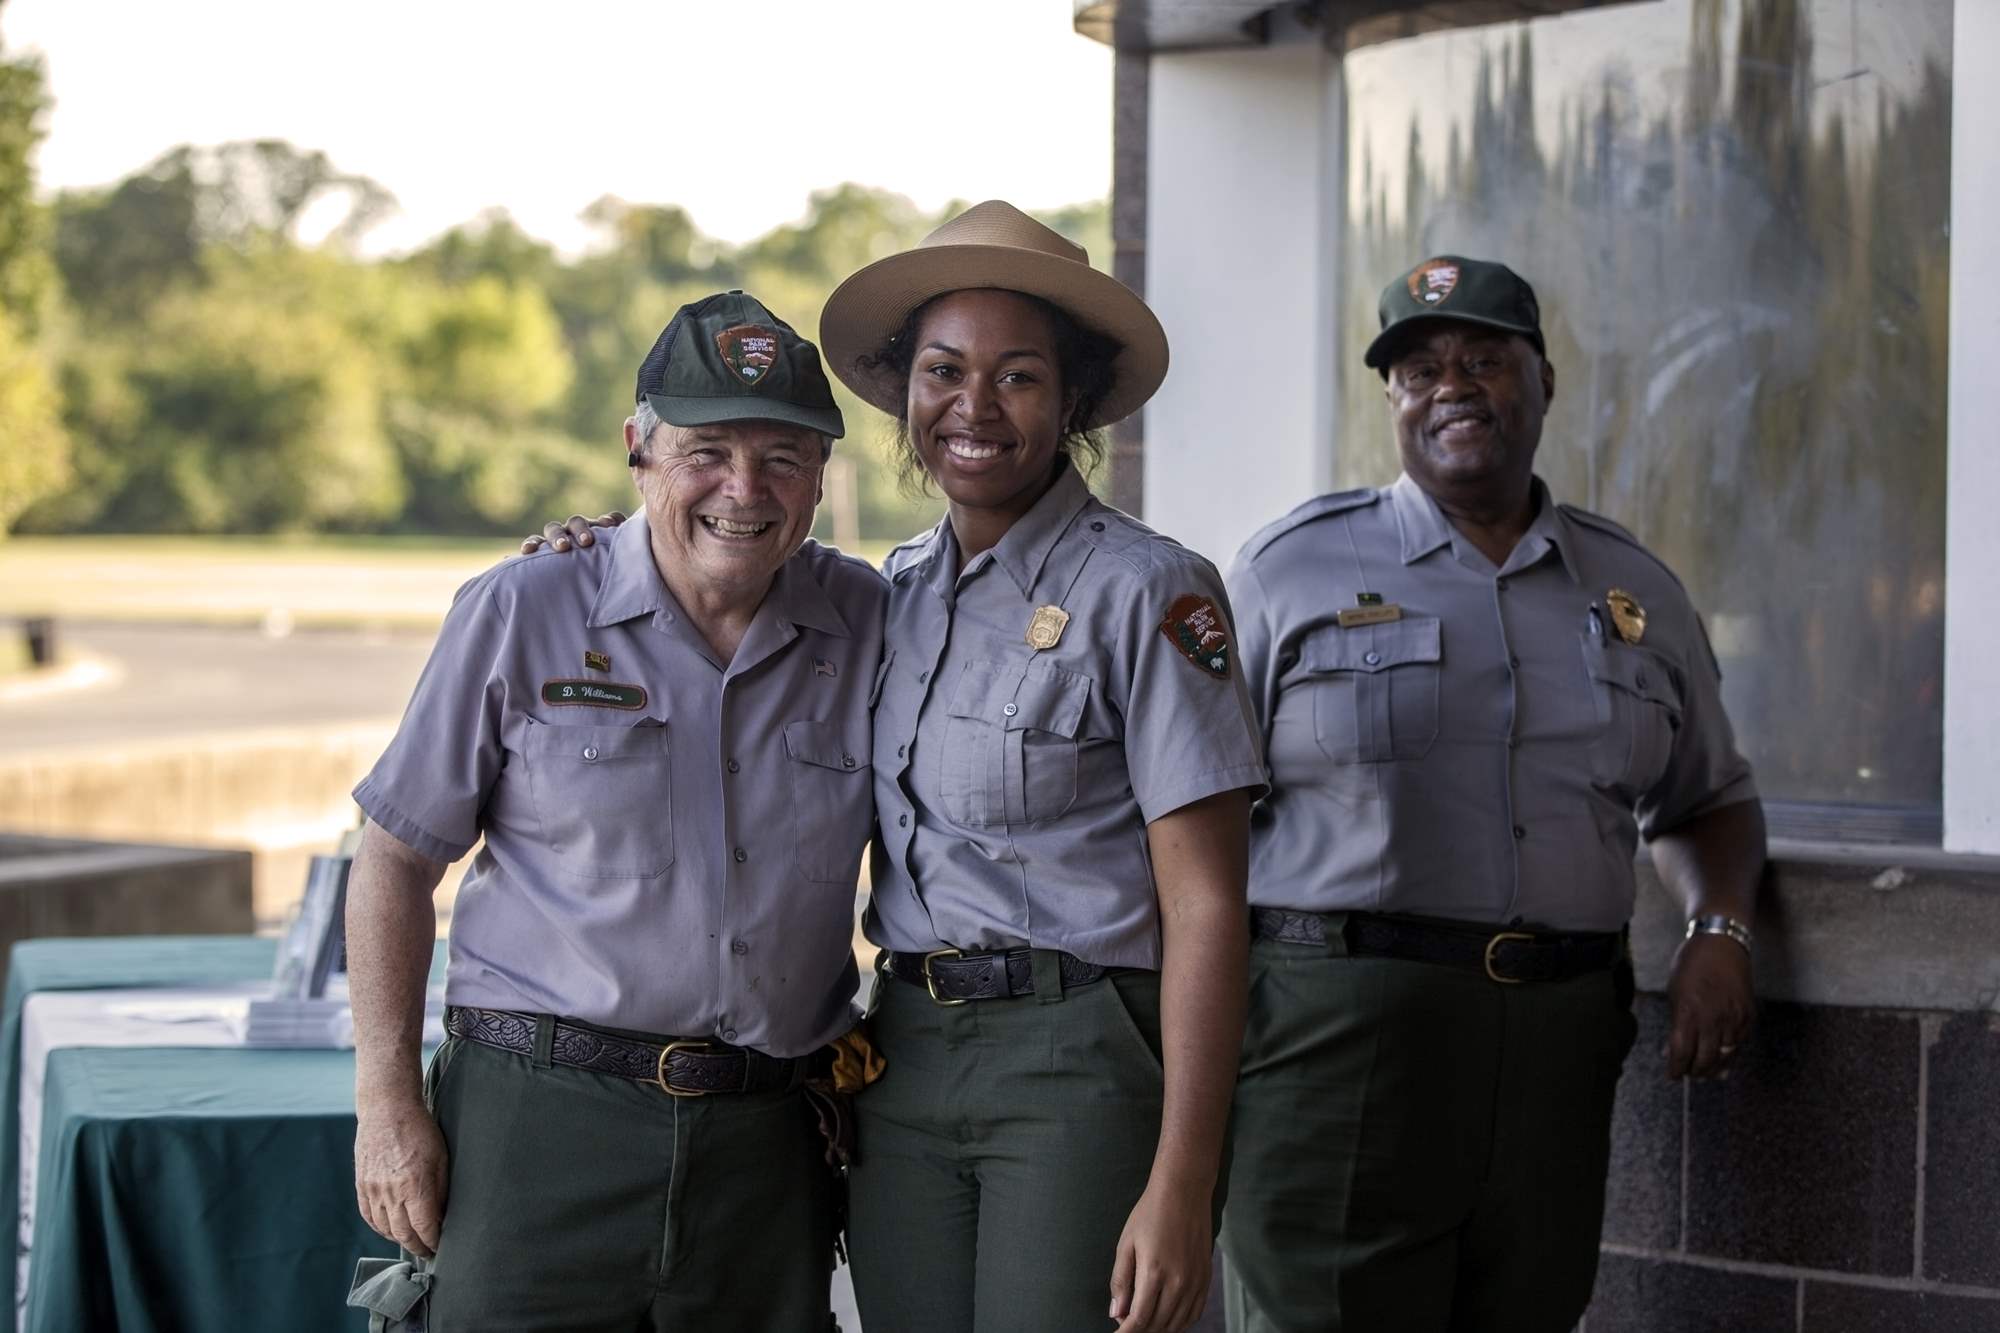 Three people stand in NPS uniforms. Only two wear badges. A woman wears a gold shield shaped badge and a man a large gold arrowhead shaped badge.